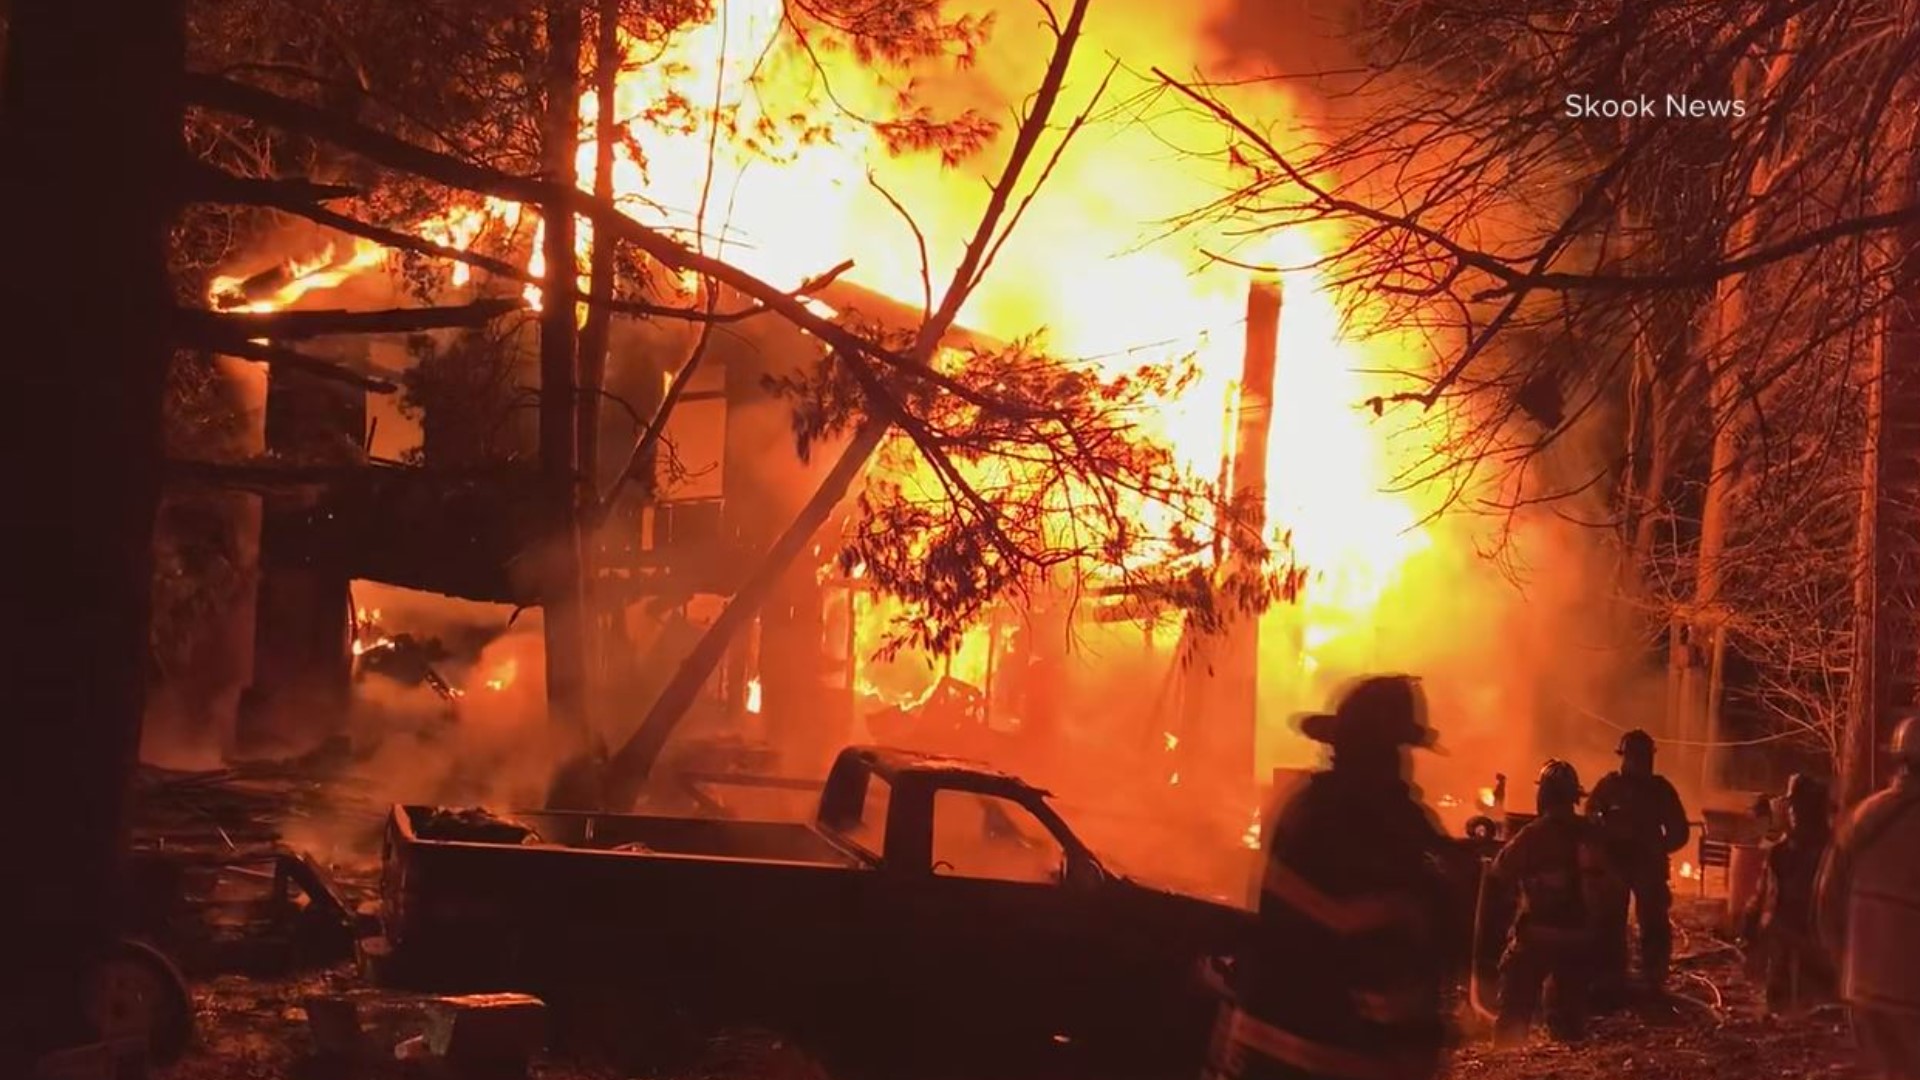 A brother and sister died in the blaze early Friday, according to family members.